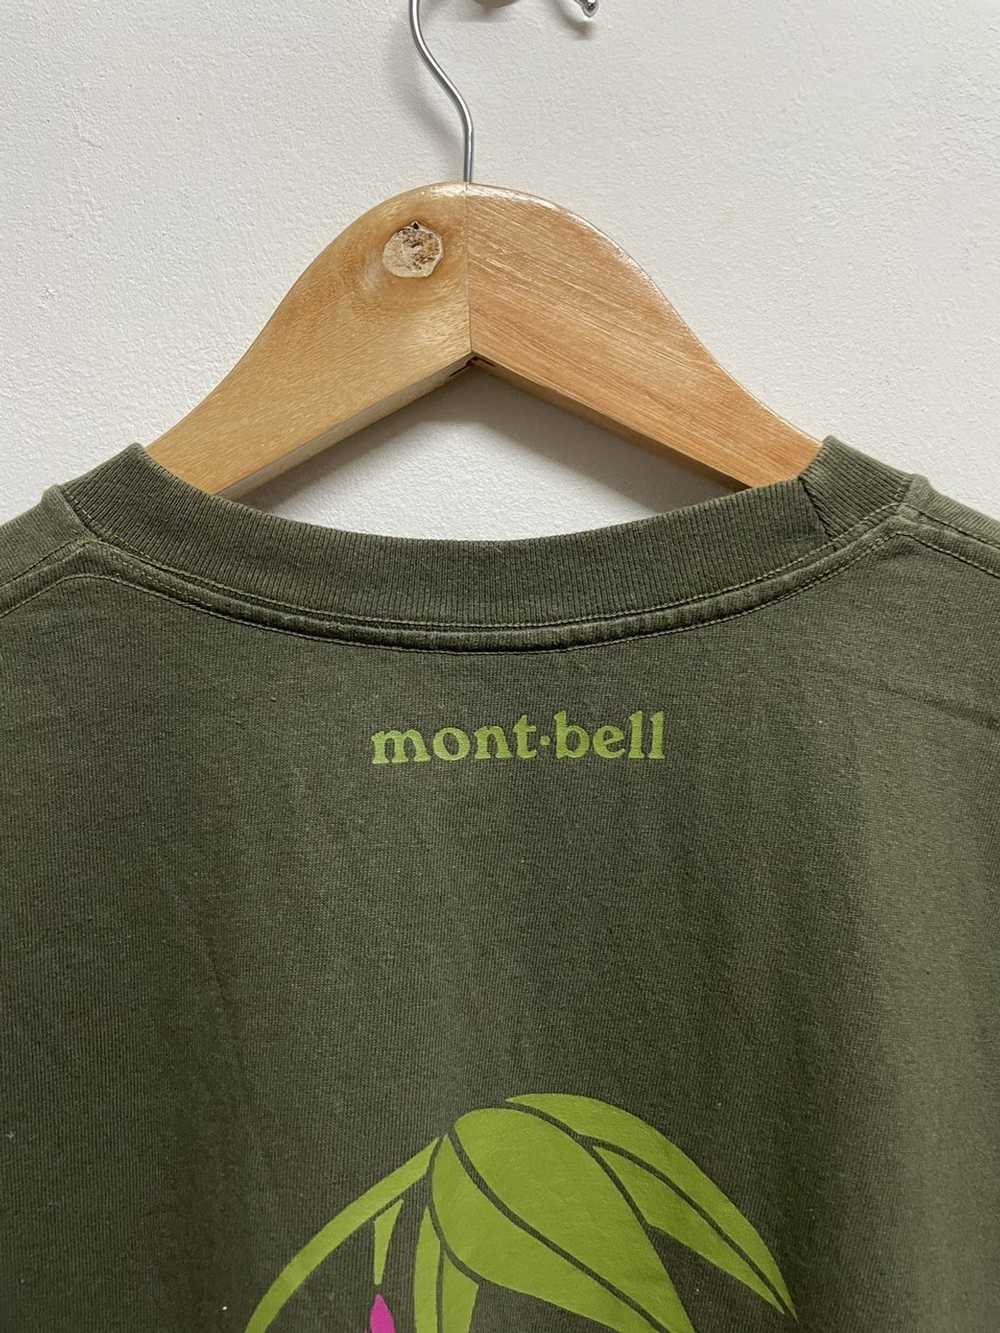 Montbell × Streetwear × Vintage MontBell T shirt - image 8